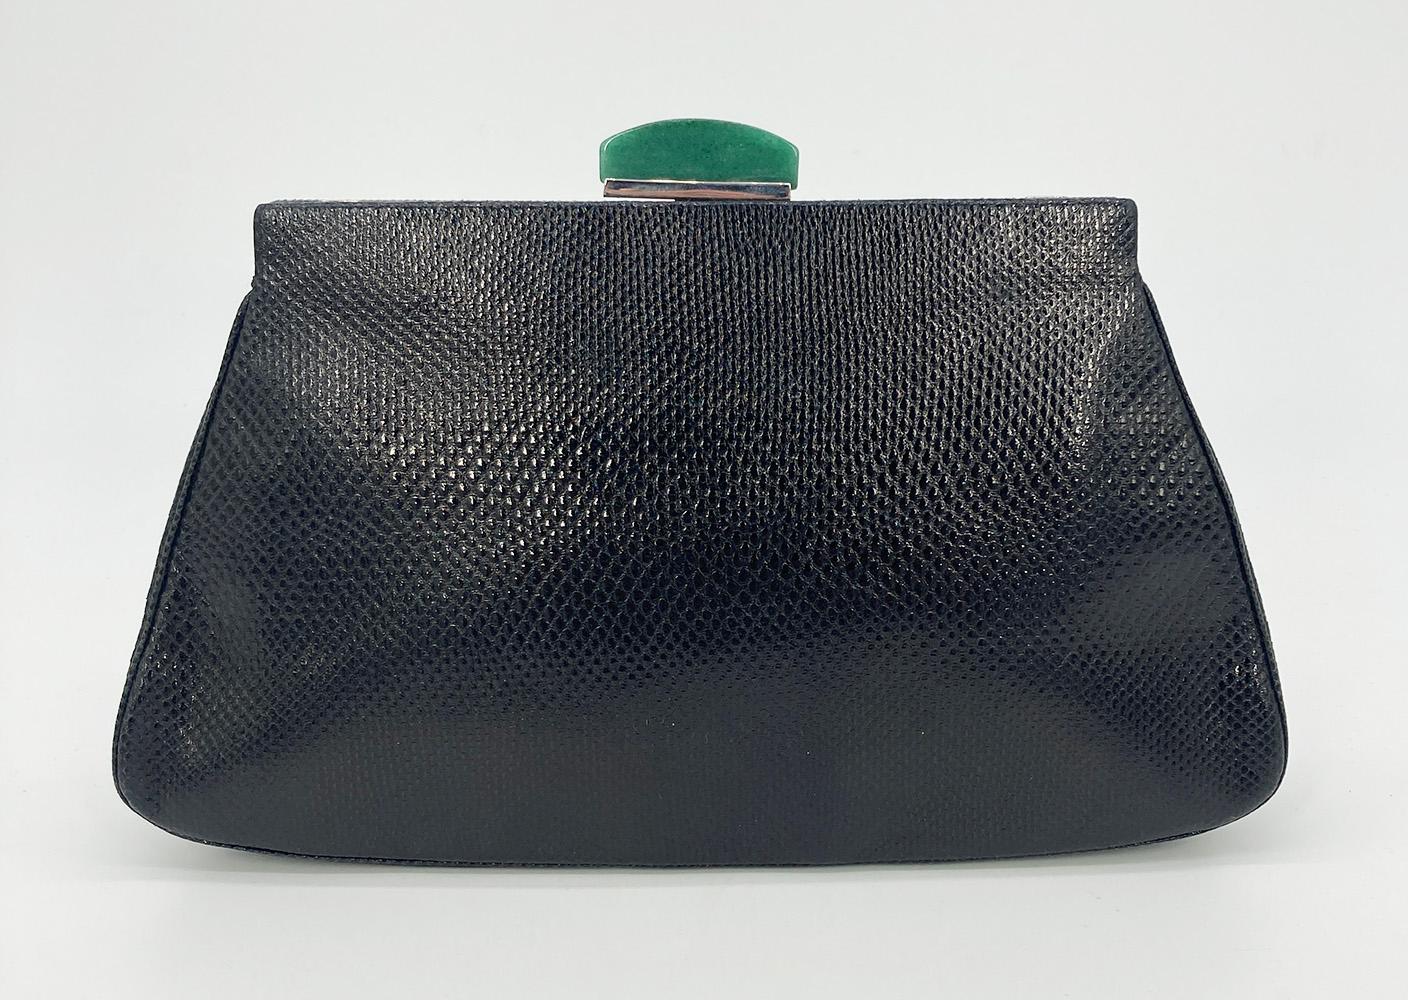 Vintage Judith Leiber Black Lizard Green Enamel Top Clutch in very good condition. Black lizard leather trimmed with silver hardware and green enamel detail along top edge. Lift latch jade closure opens to a black satin interior with one slit and